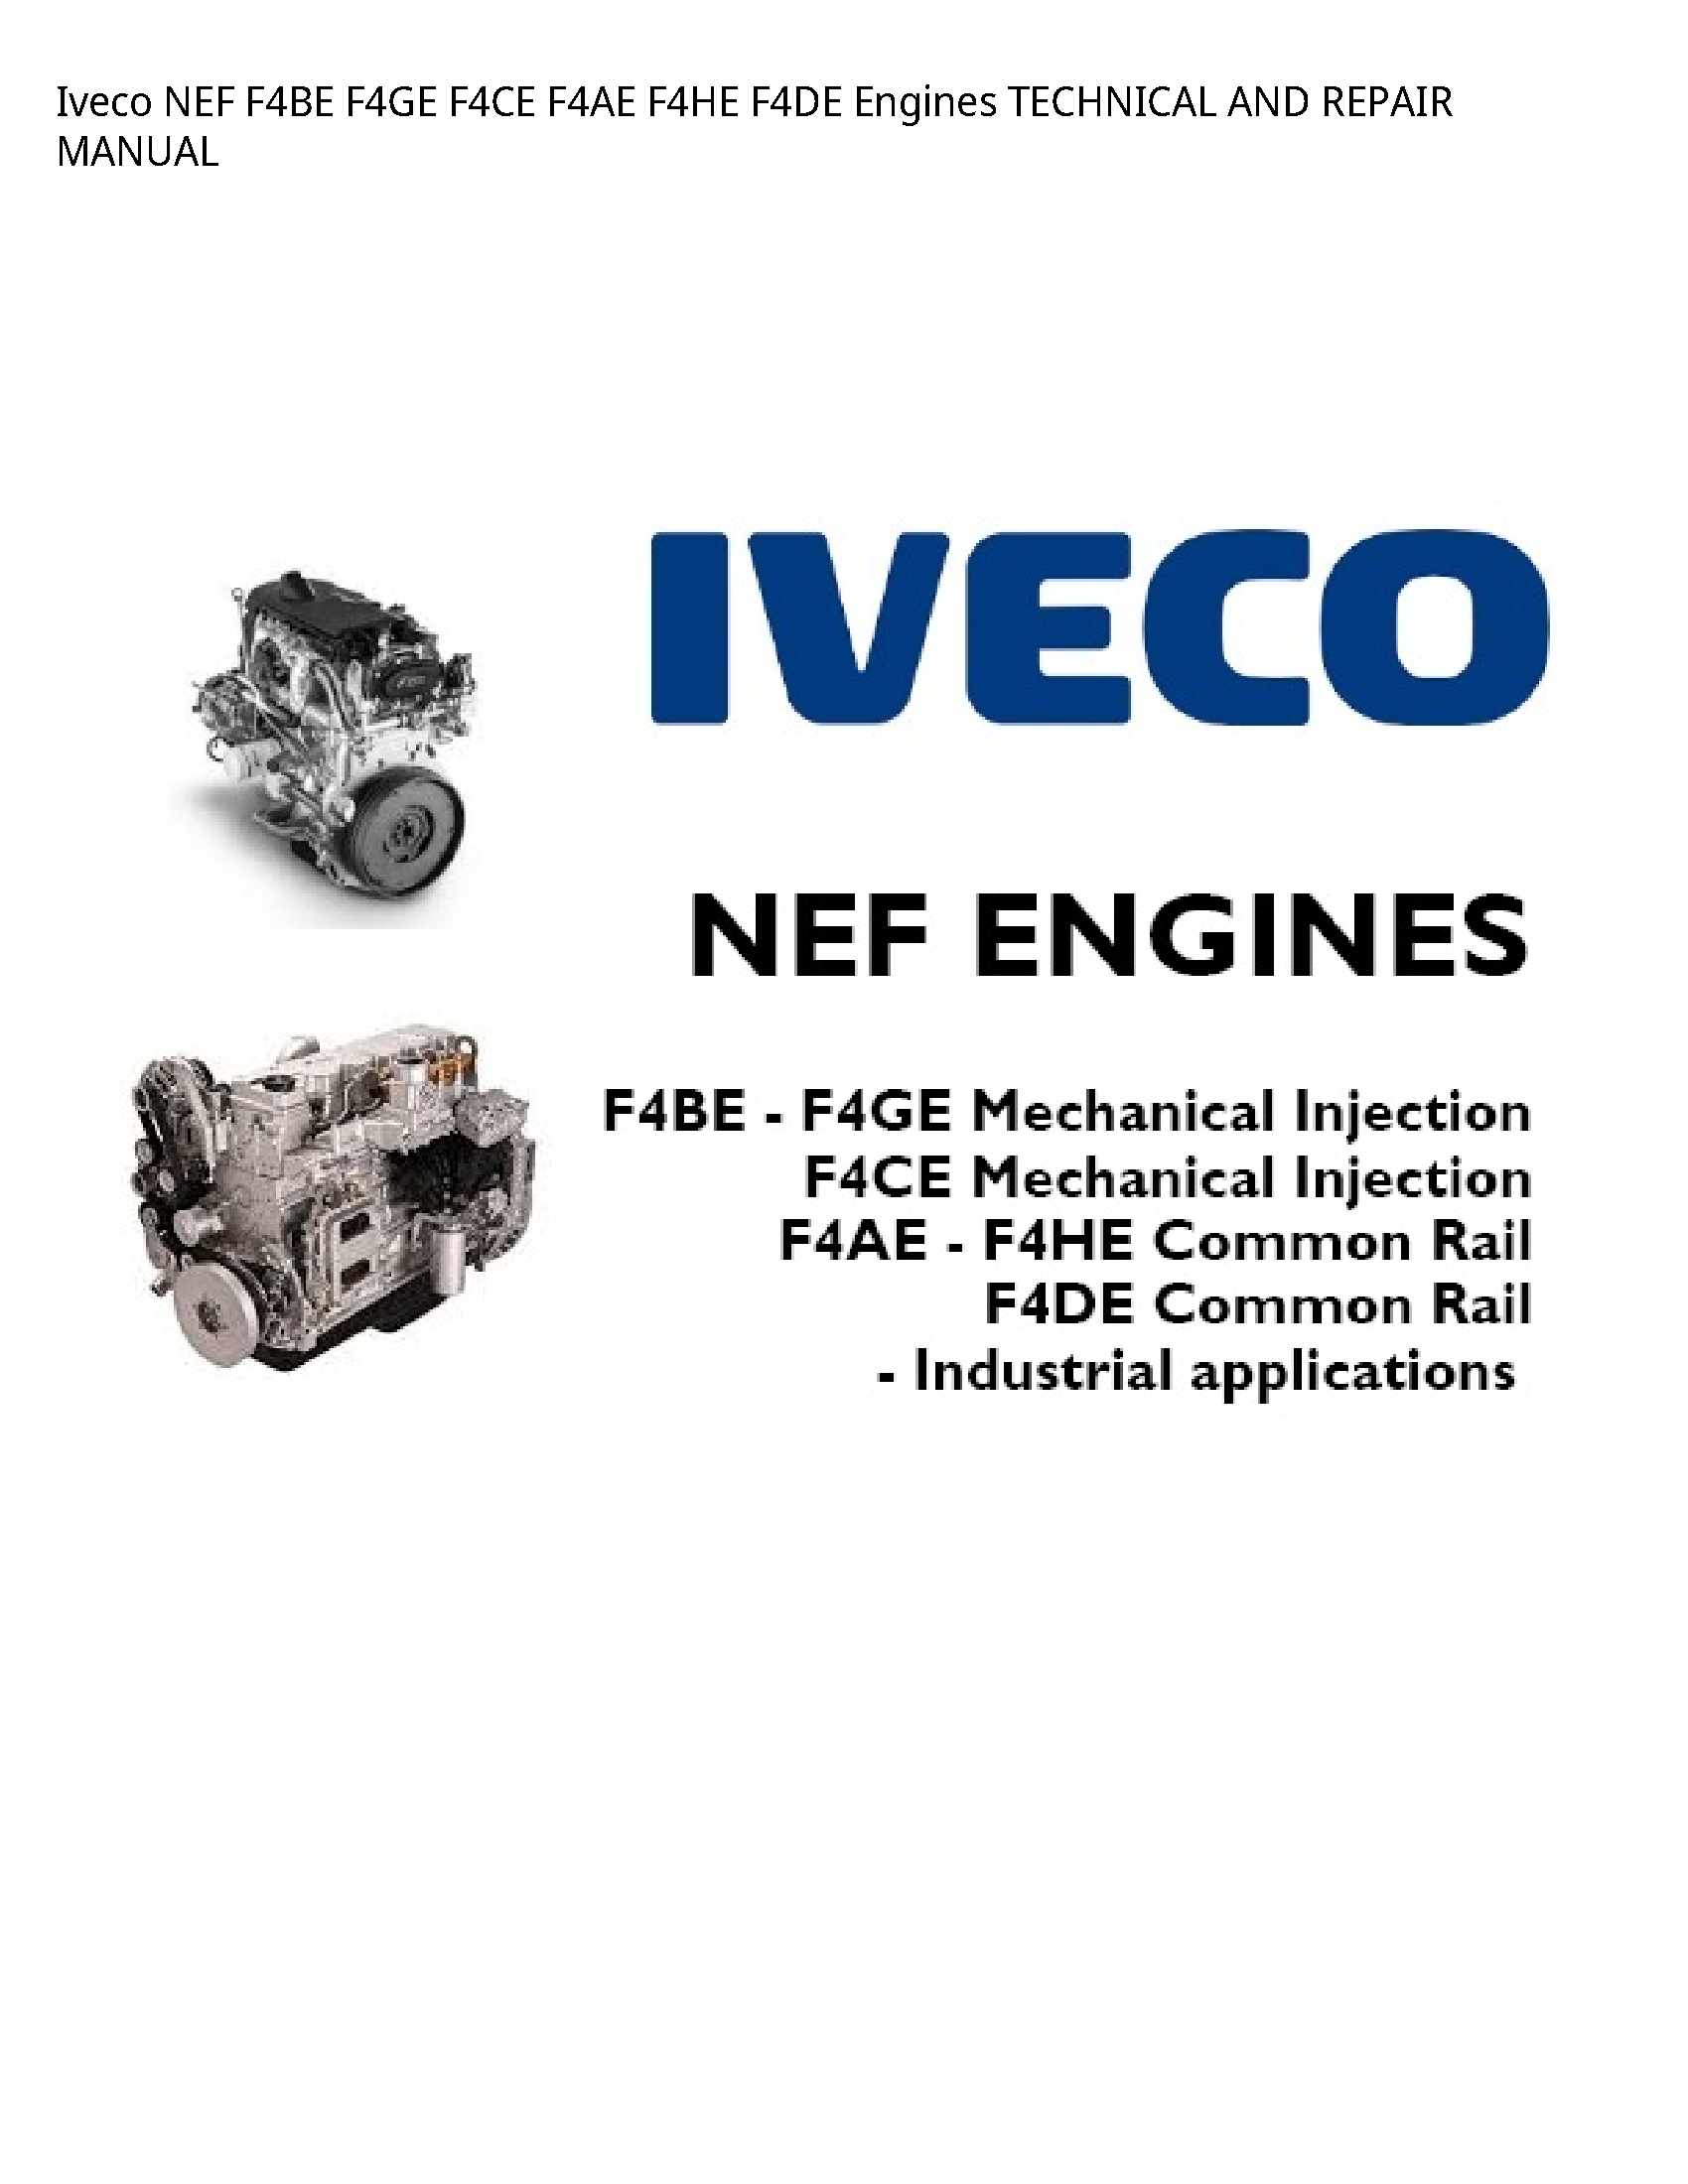 Iveco F4BE NEF Engines TECHNICAL AND REPAIR manual